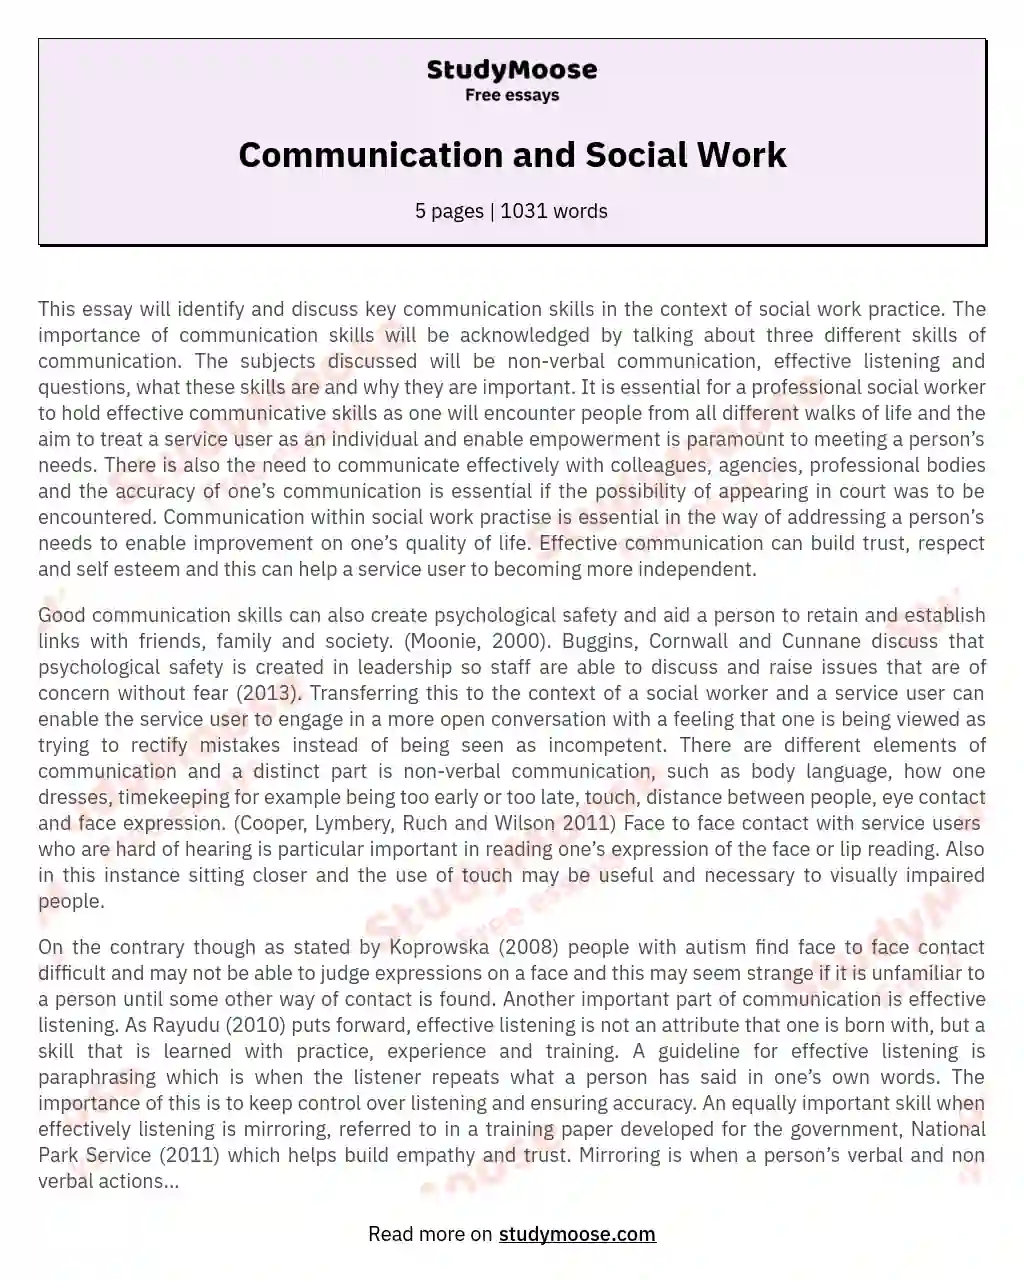 The Crucial Role of Communication Skills in Social Work Practice essay